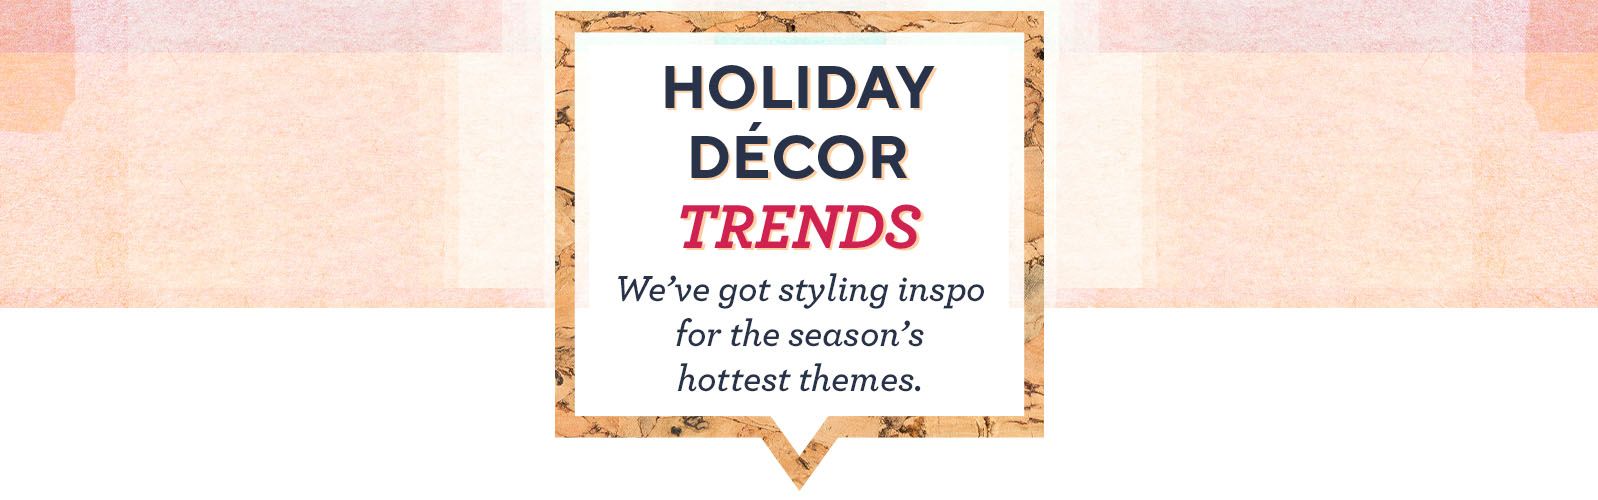 Holiday Décor Trends.  We've got styling inspo for the season's hottest themes.